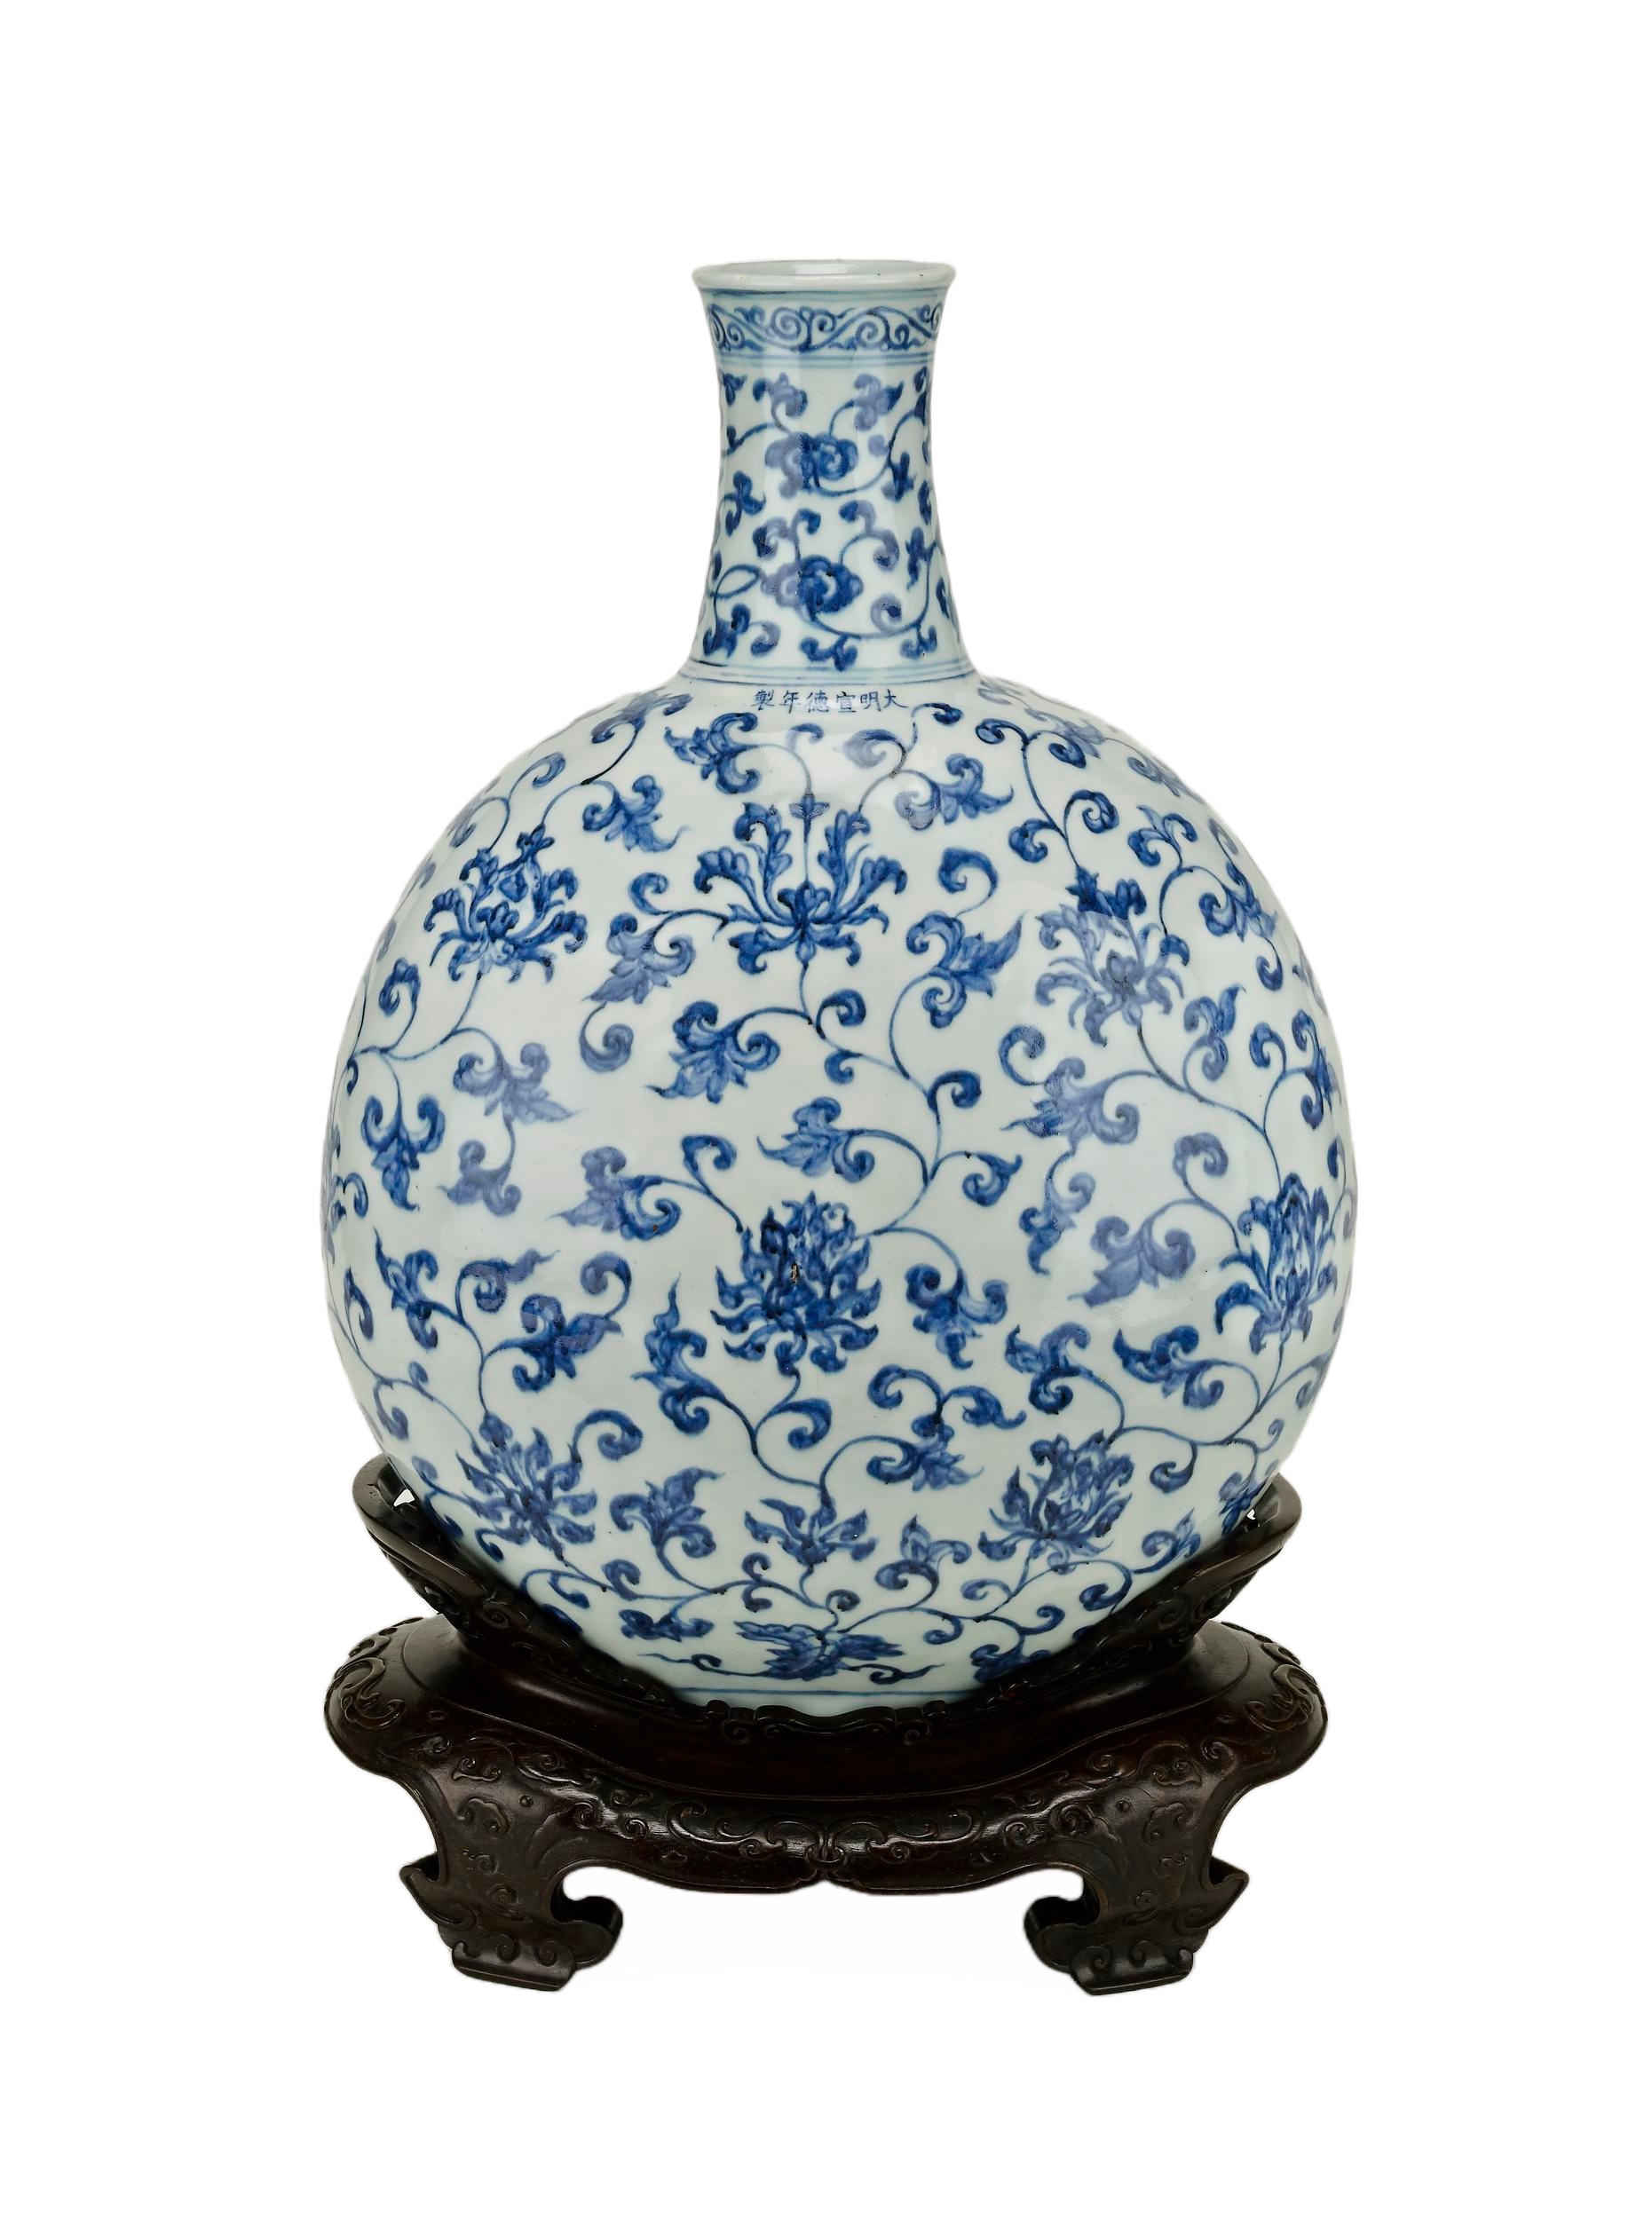 Smarthistory – Chinese porcelain: production and export